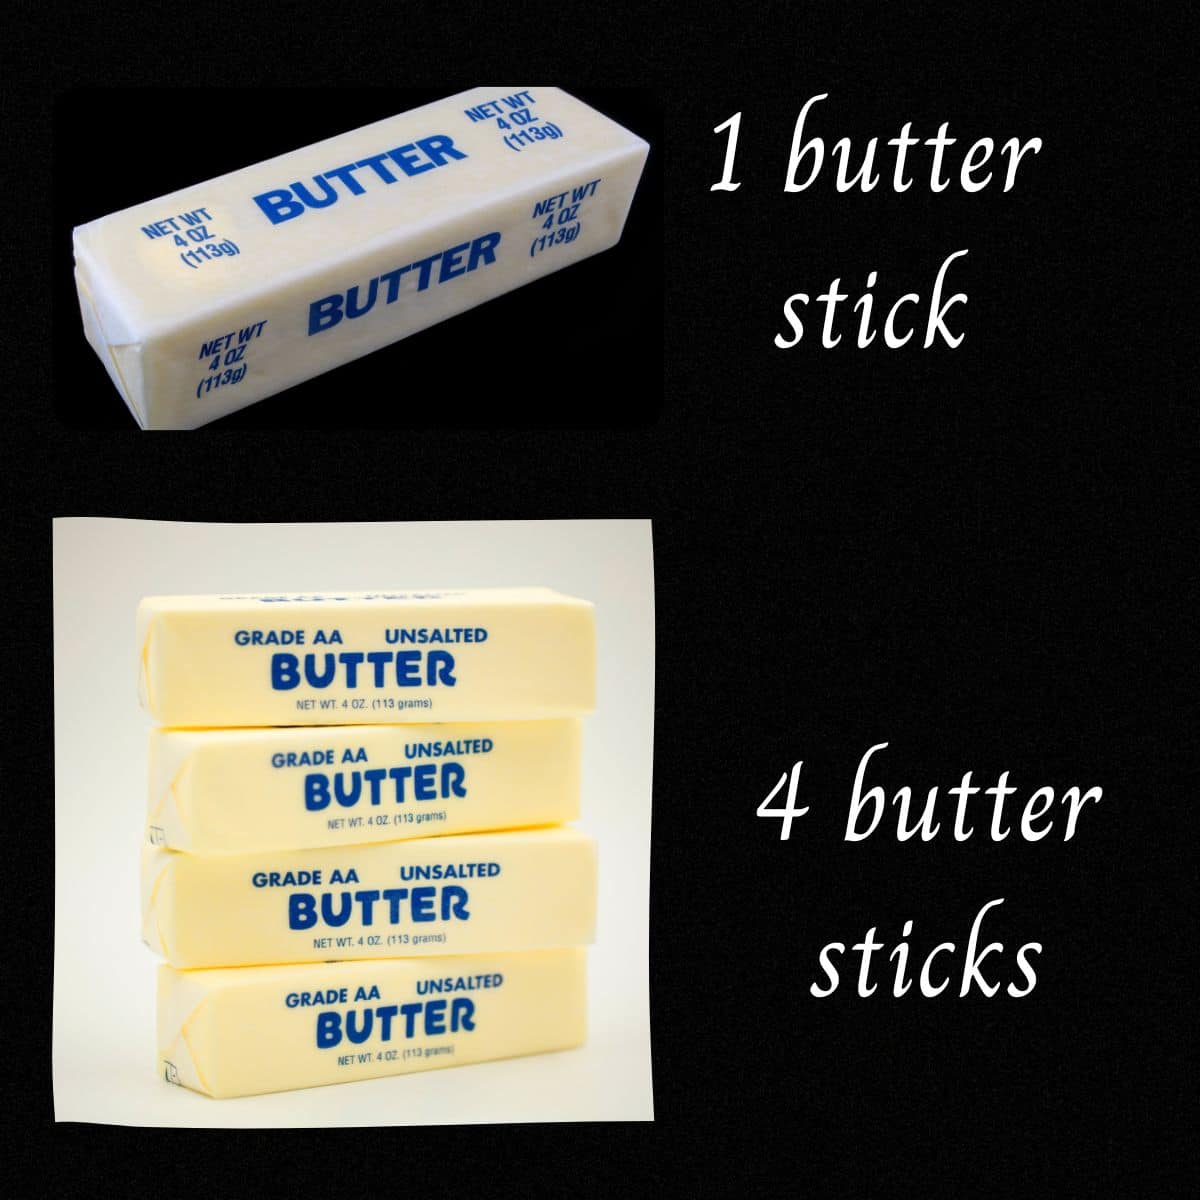 1 stick of butter and 4 butter sticks with text showing sticks 